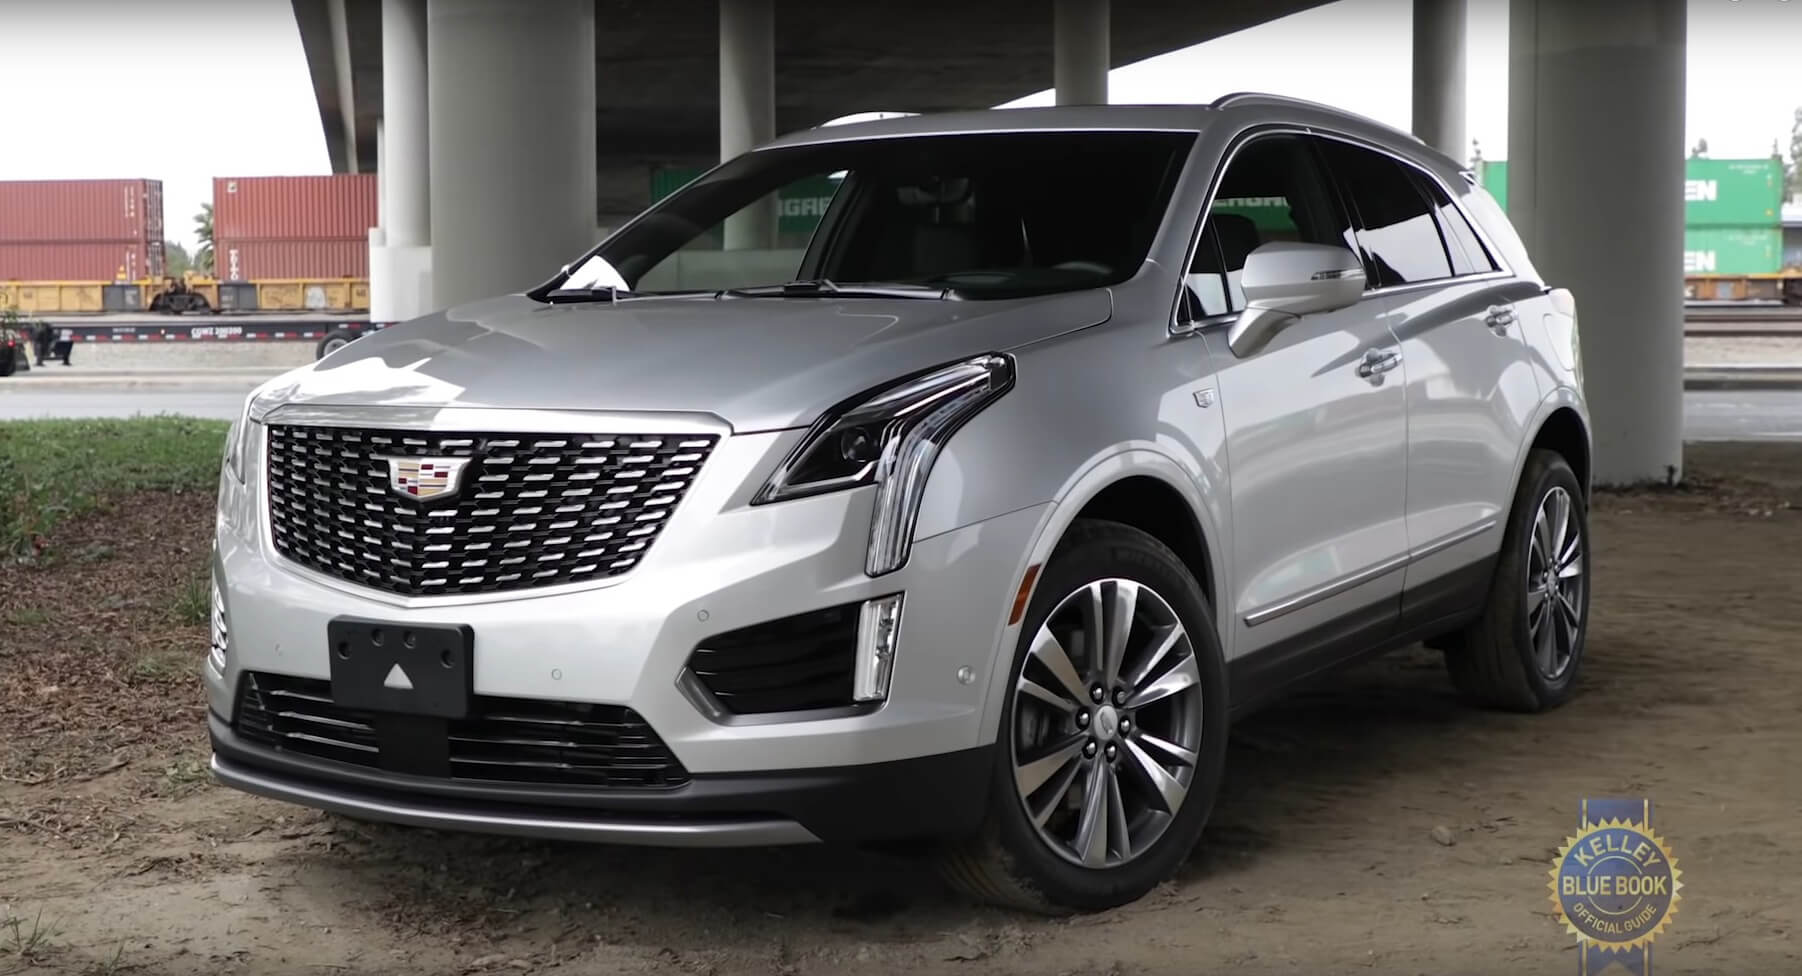 2020 Cadillac XT5: Are The Updates Enough To Keep It Competitive? |  Carscoops